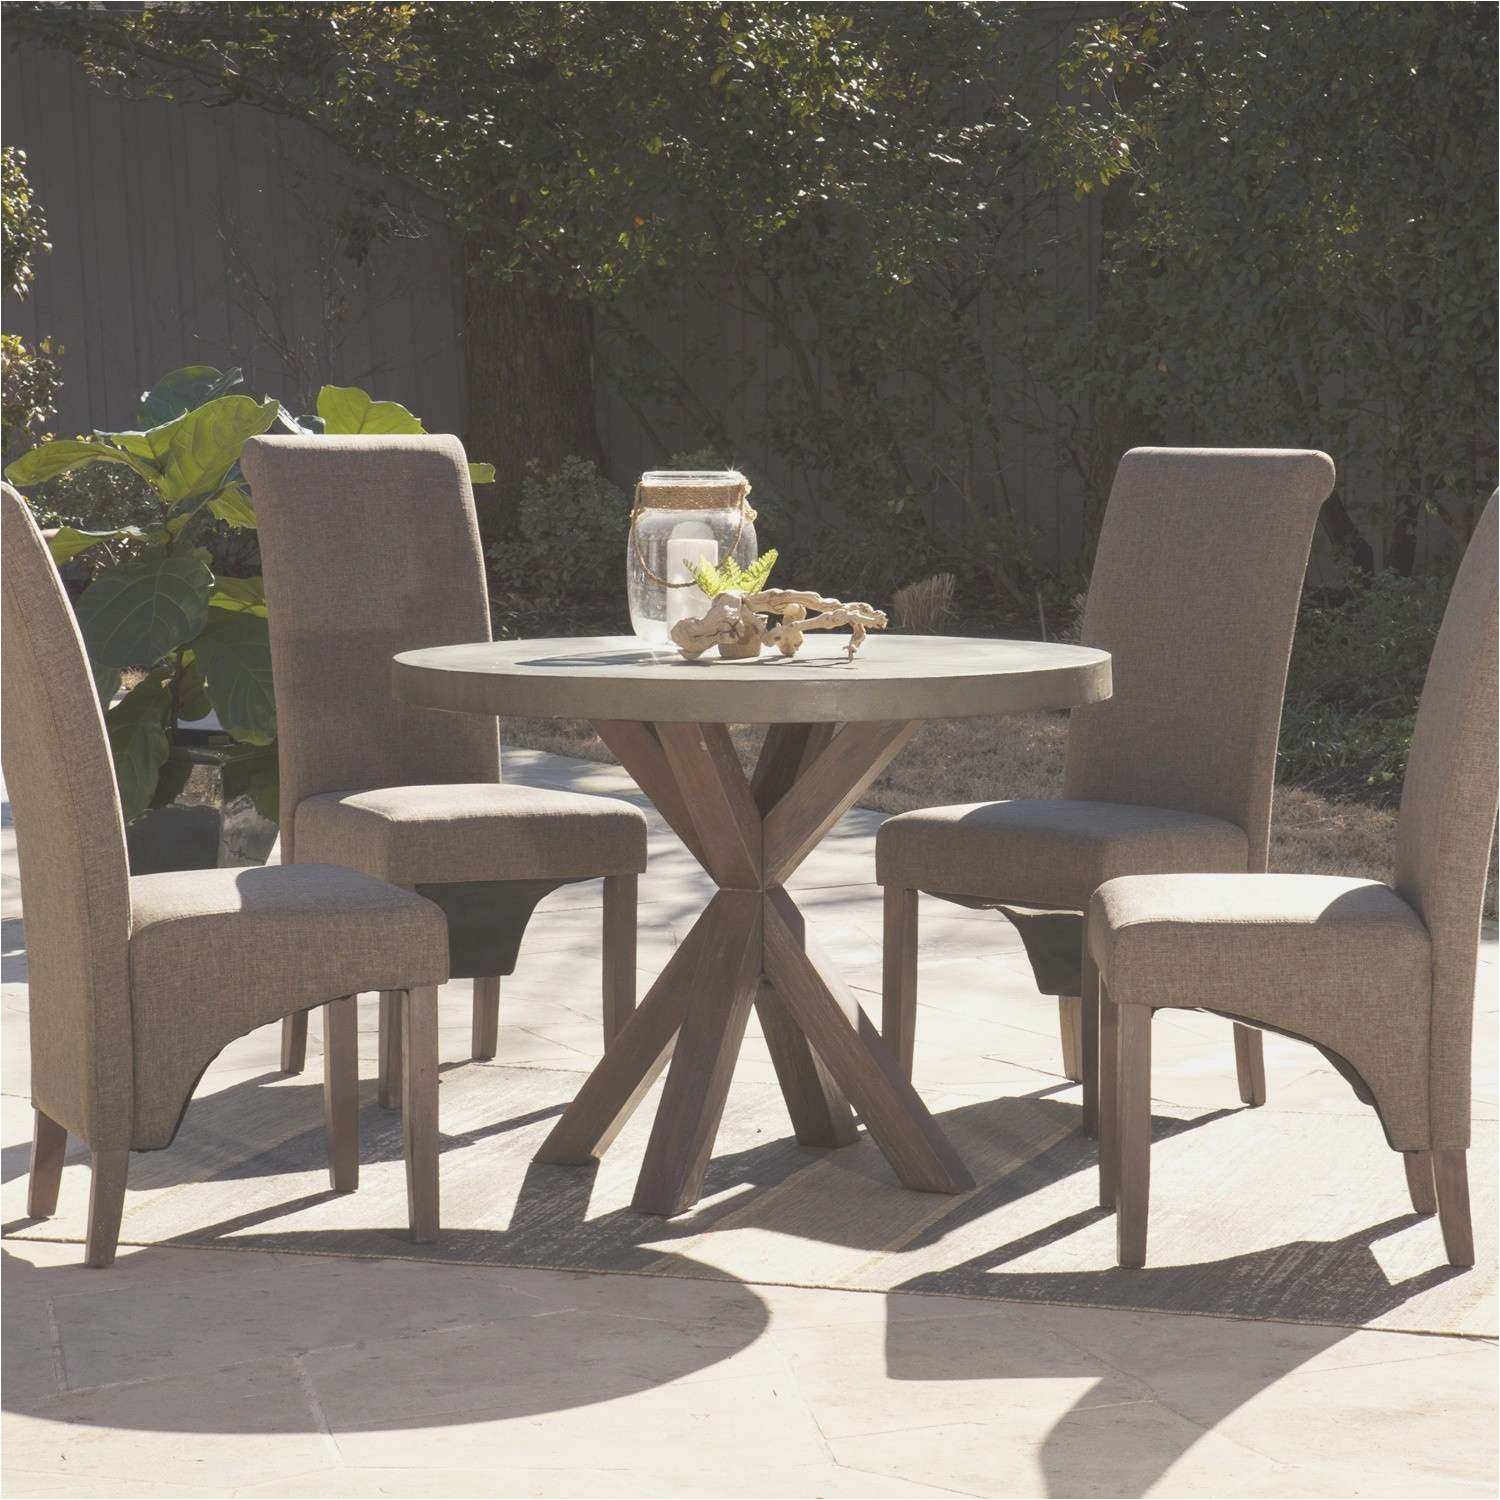 table and chair rental near me stunning outdoor table and chairs best wicker outdoor sofa 0d